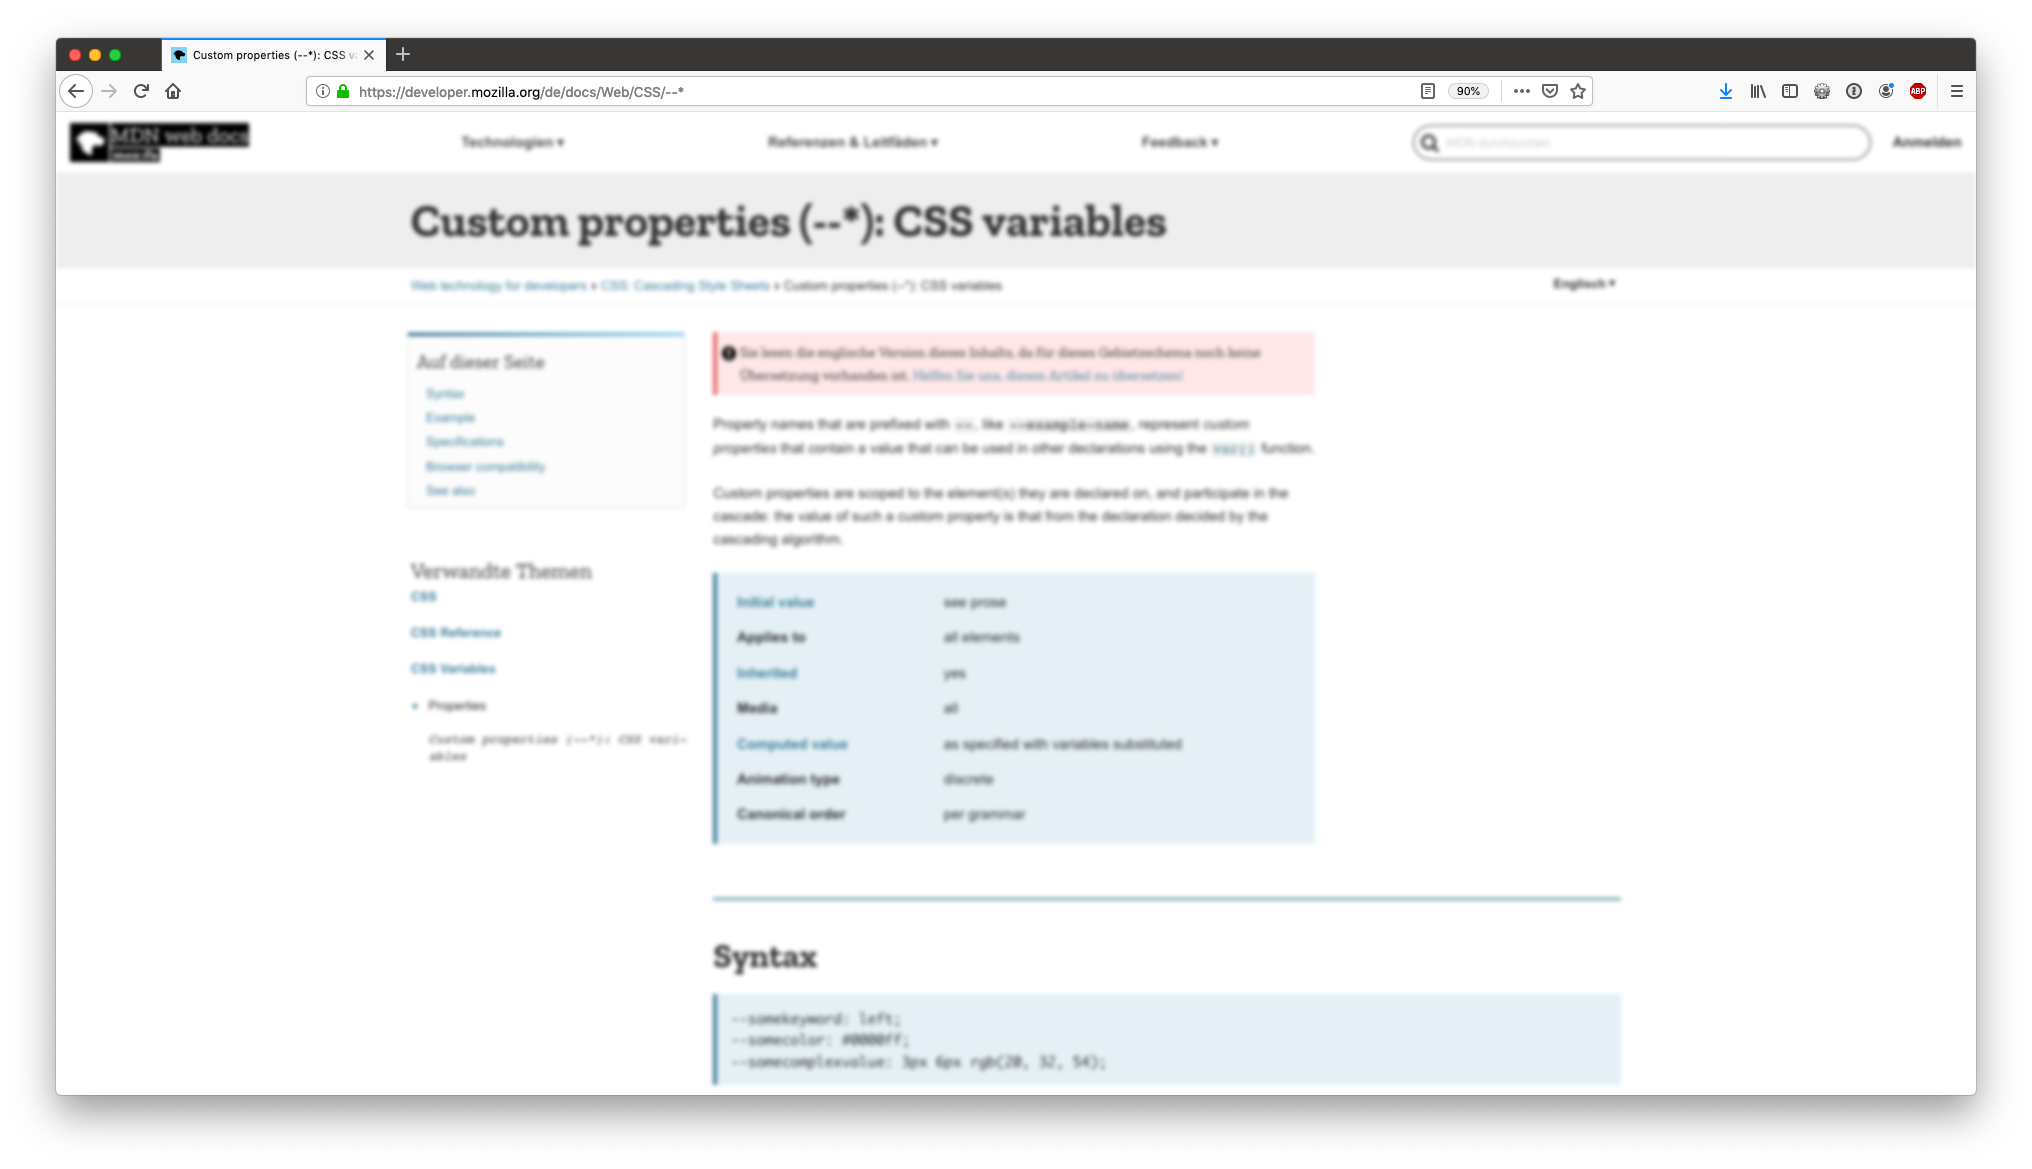 a11y-tests.css